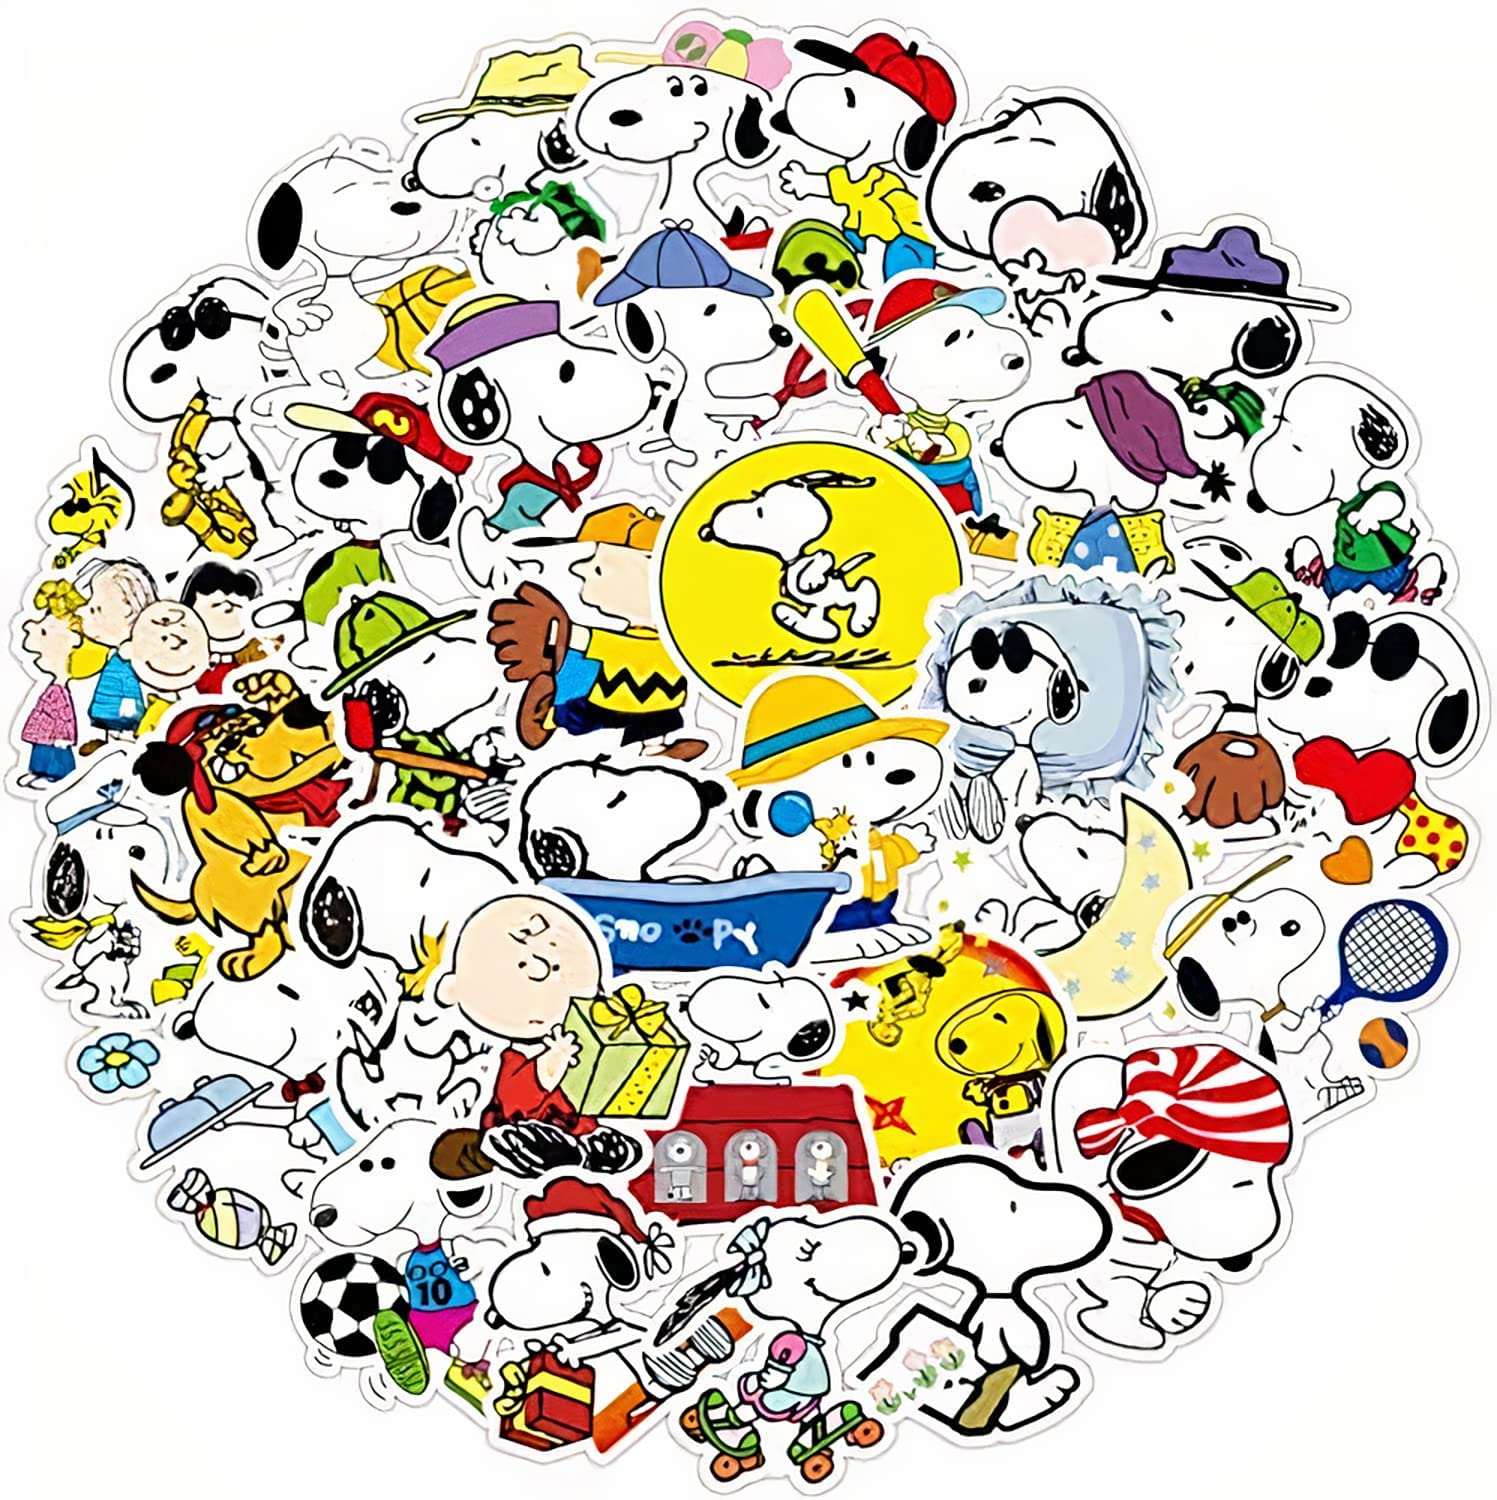 Cute Snoopy And Friends Stickers is the best way to keep your and